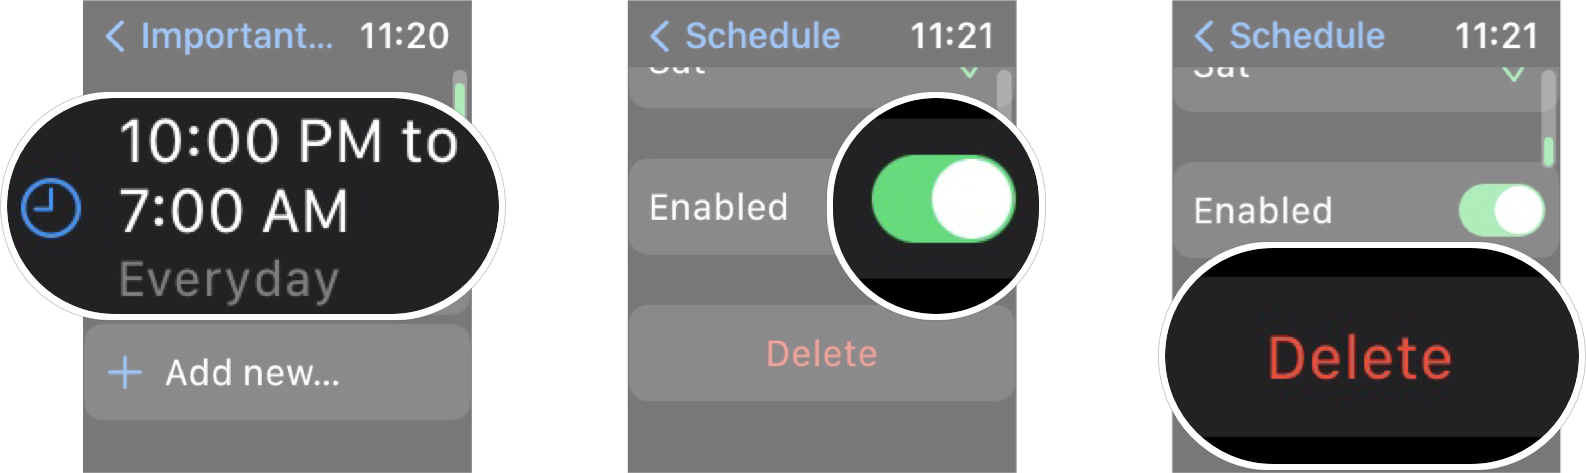 How To Disable Focus Schedule In watchOS 8: Tap the schedule you want to disable, tap the enabled on/off switch to disable the schedule, or tap delete to delete the schedule. 